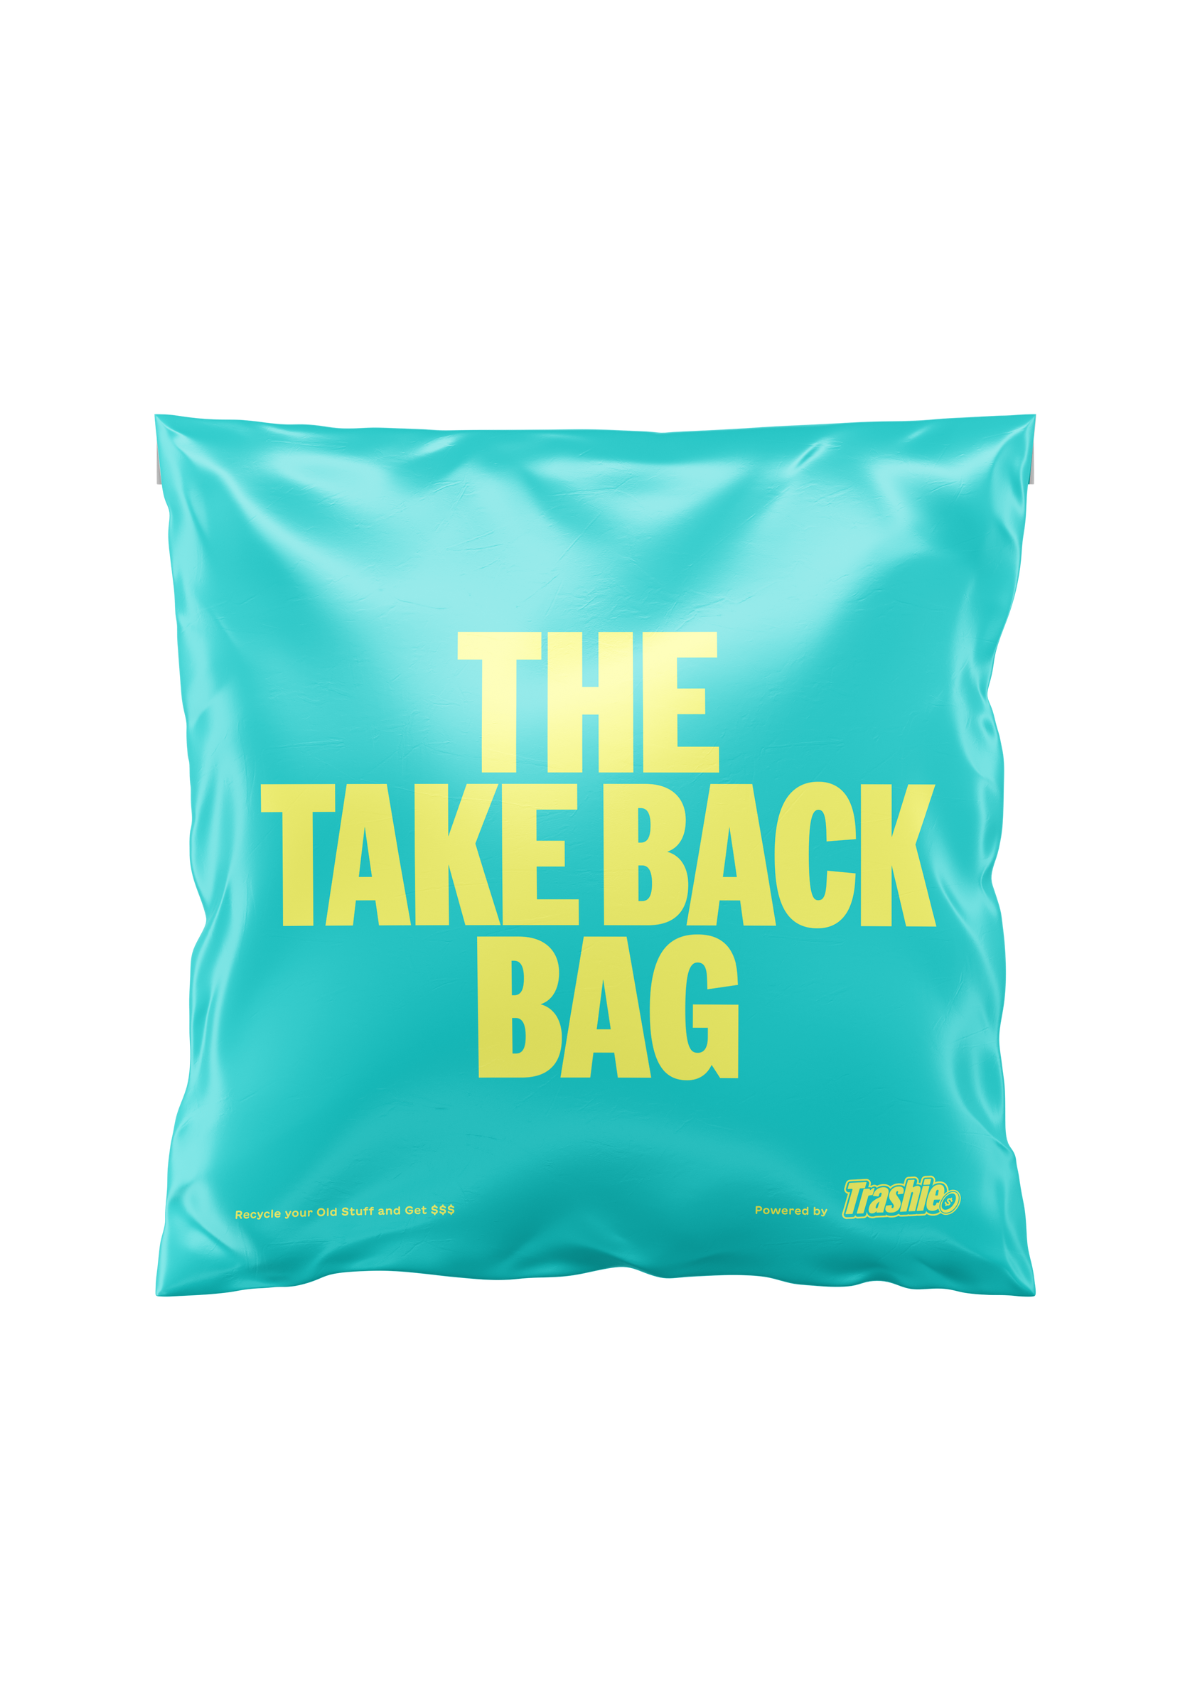 Our gift to you: Spend $20 on a Take Back Bag, Get $50 🎁 Now